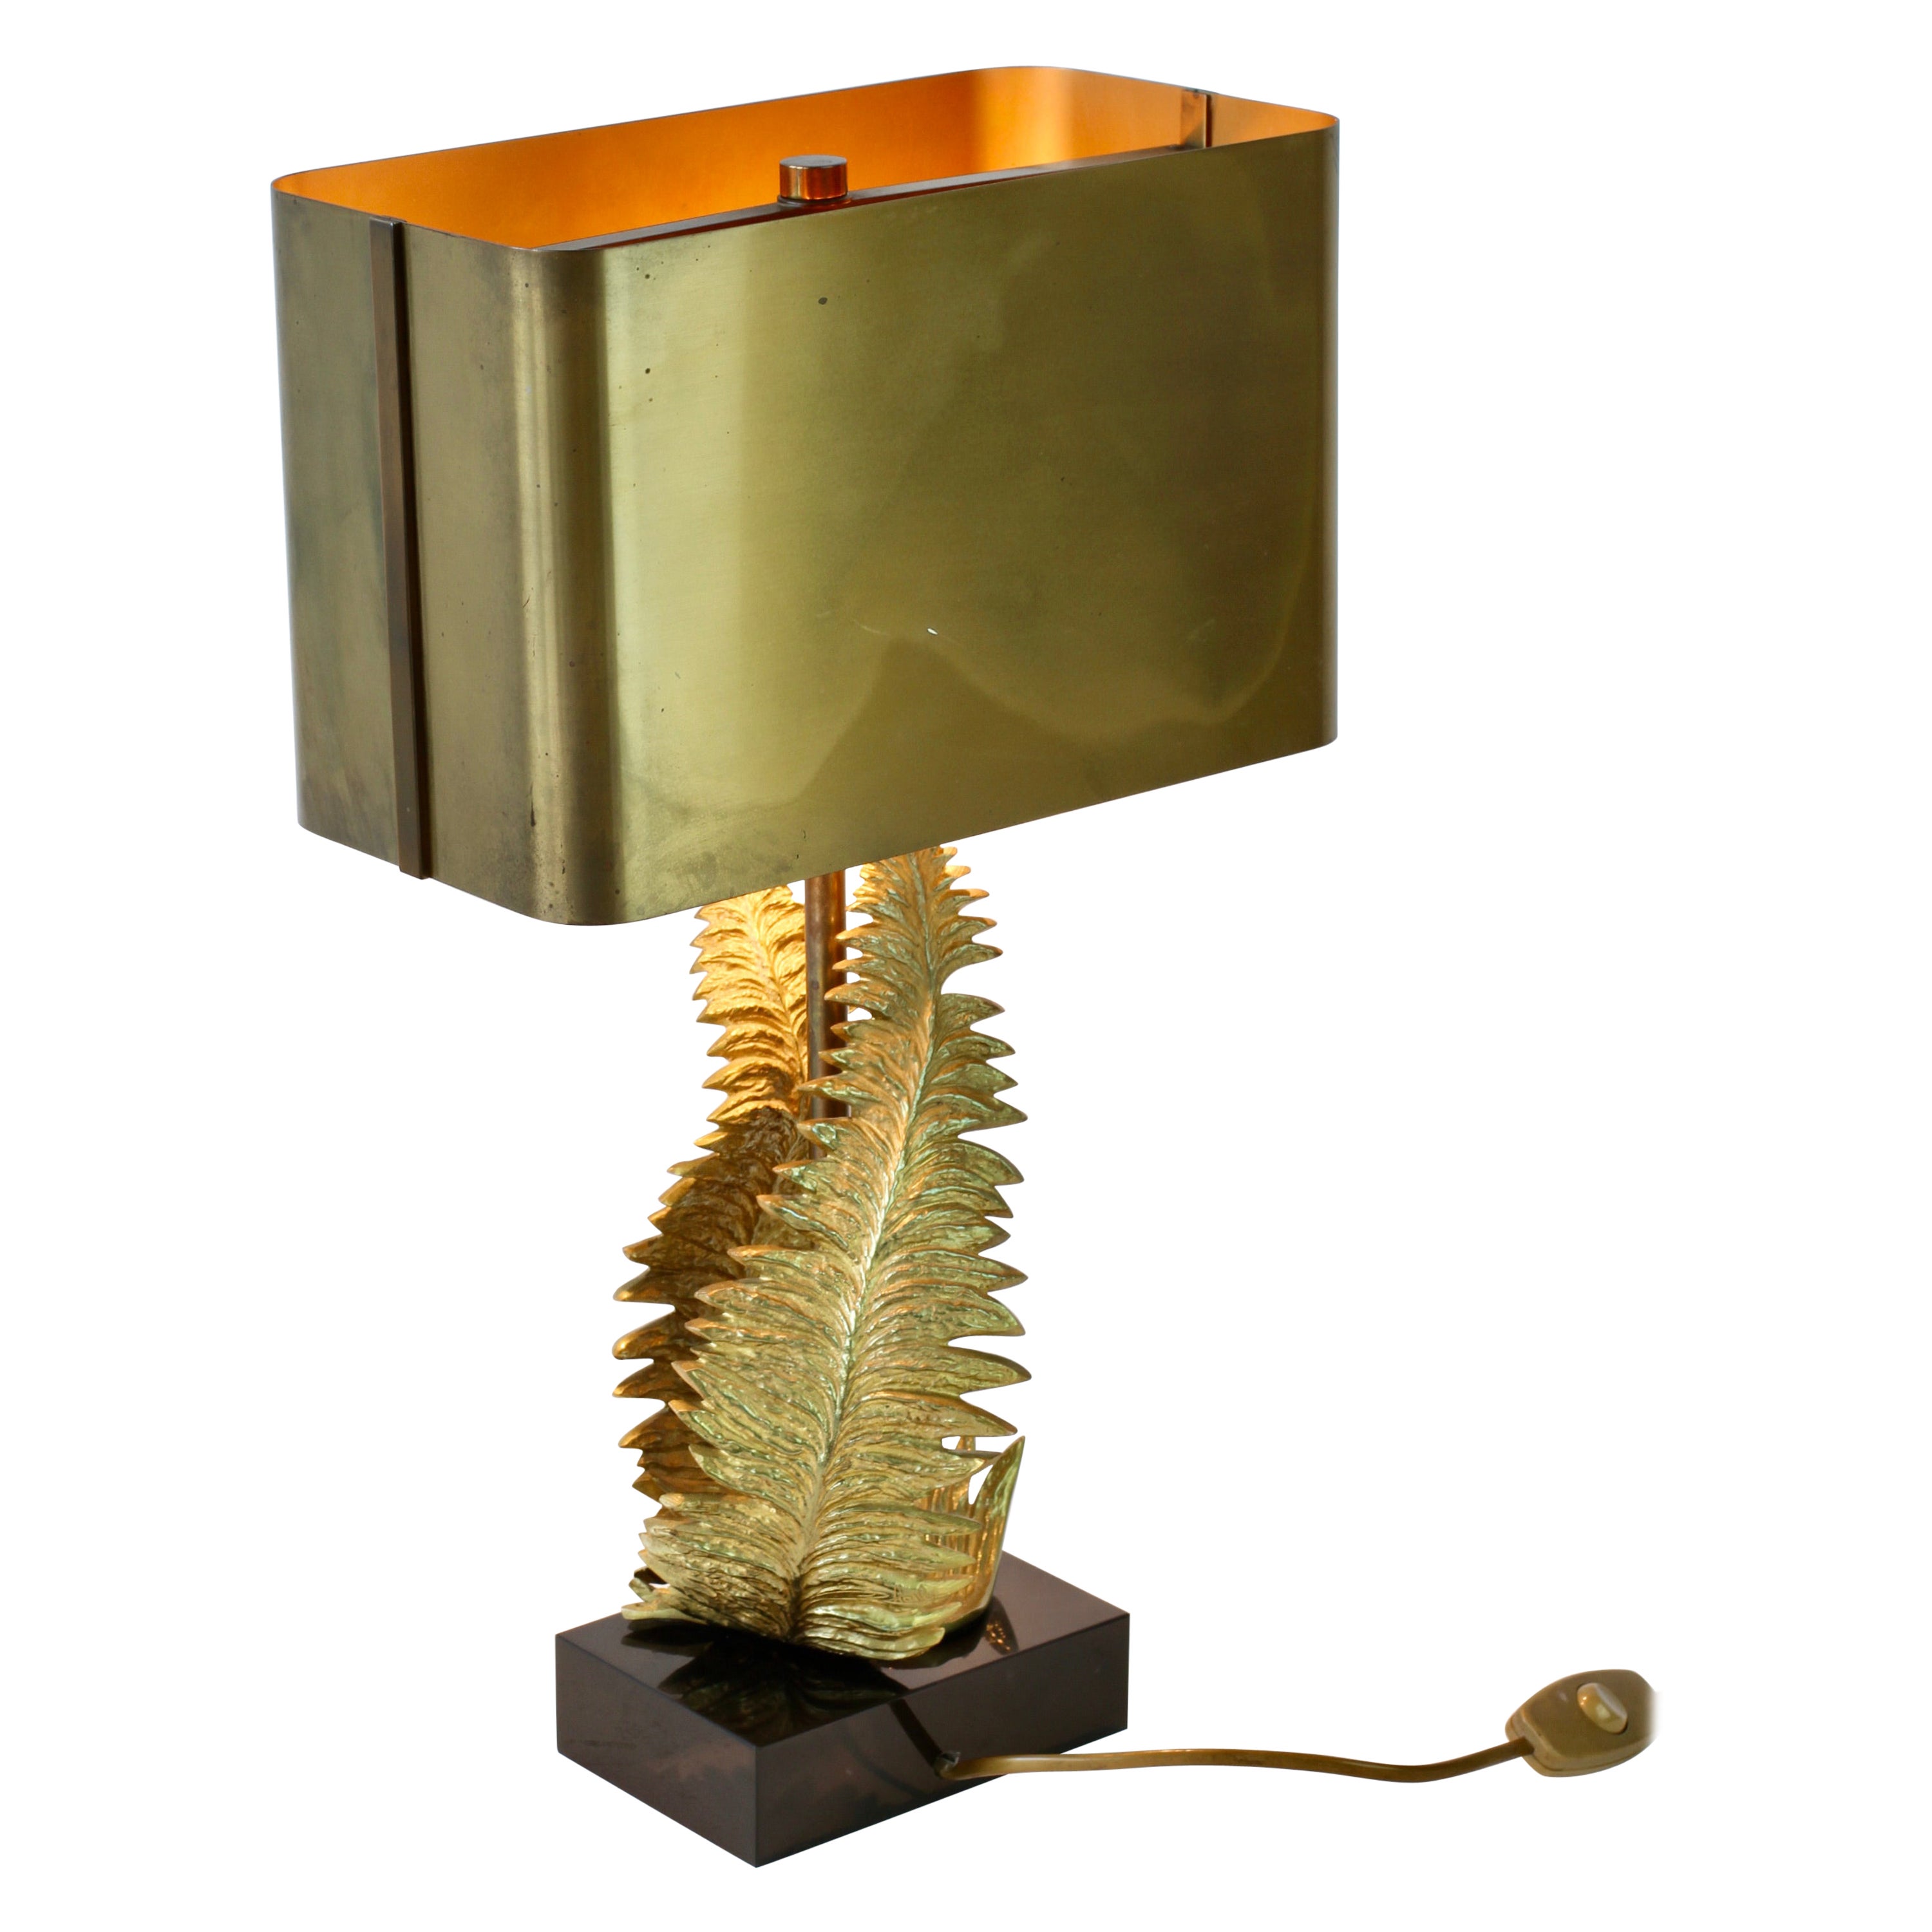 Chrystiane Charles for Maison Charles Signed Brass Fern Table Lamp circa 1960s